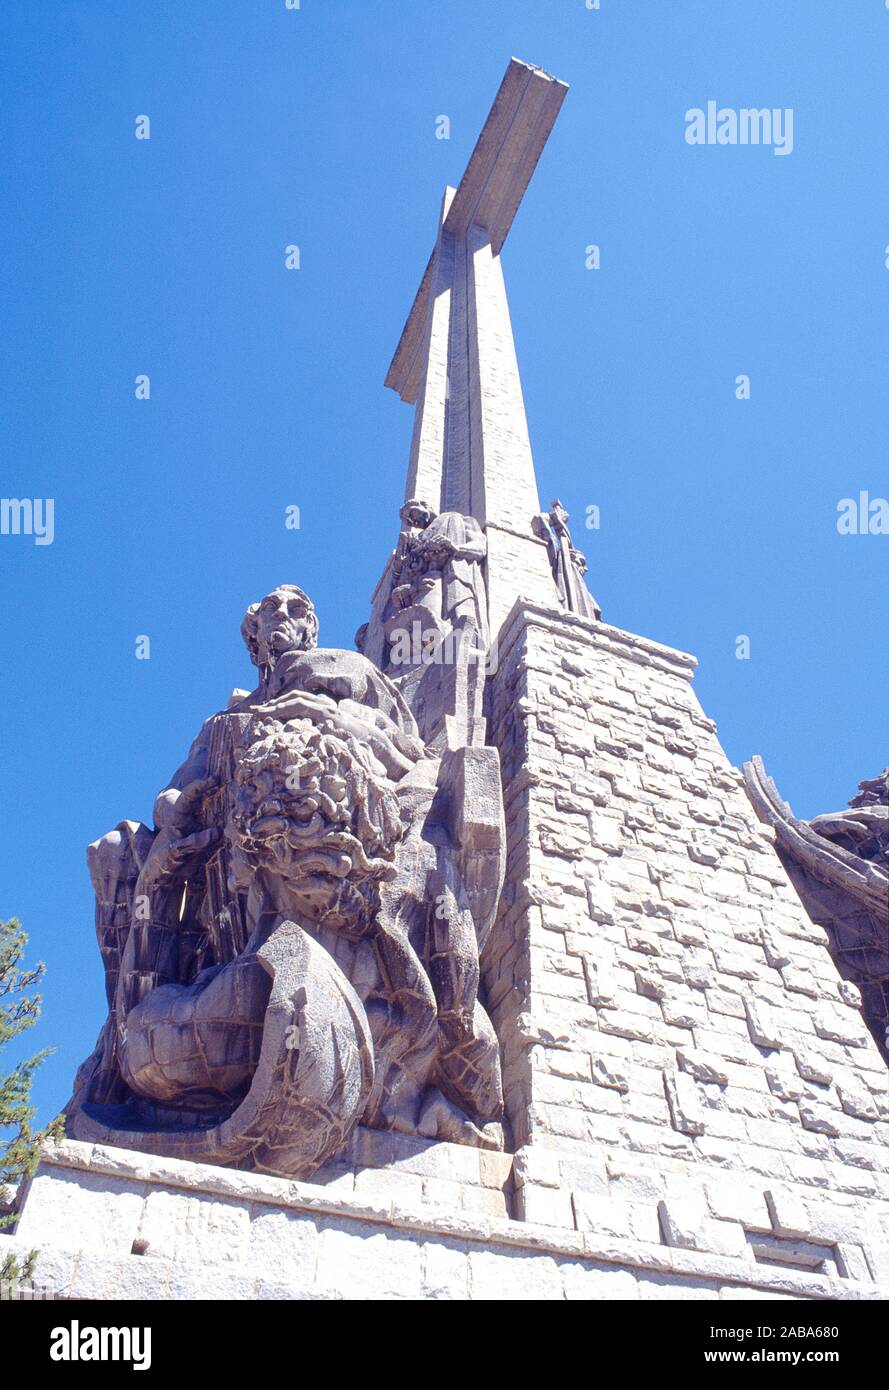 Cross, view from below. Valle de los caidos, Madrid province, Spain. Stock Photo